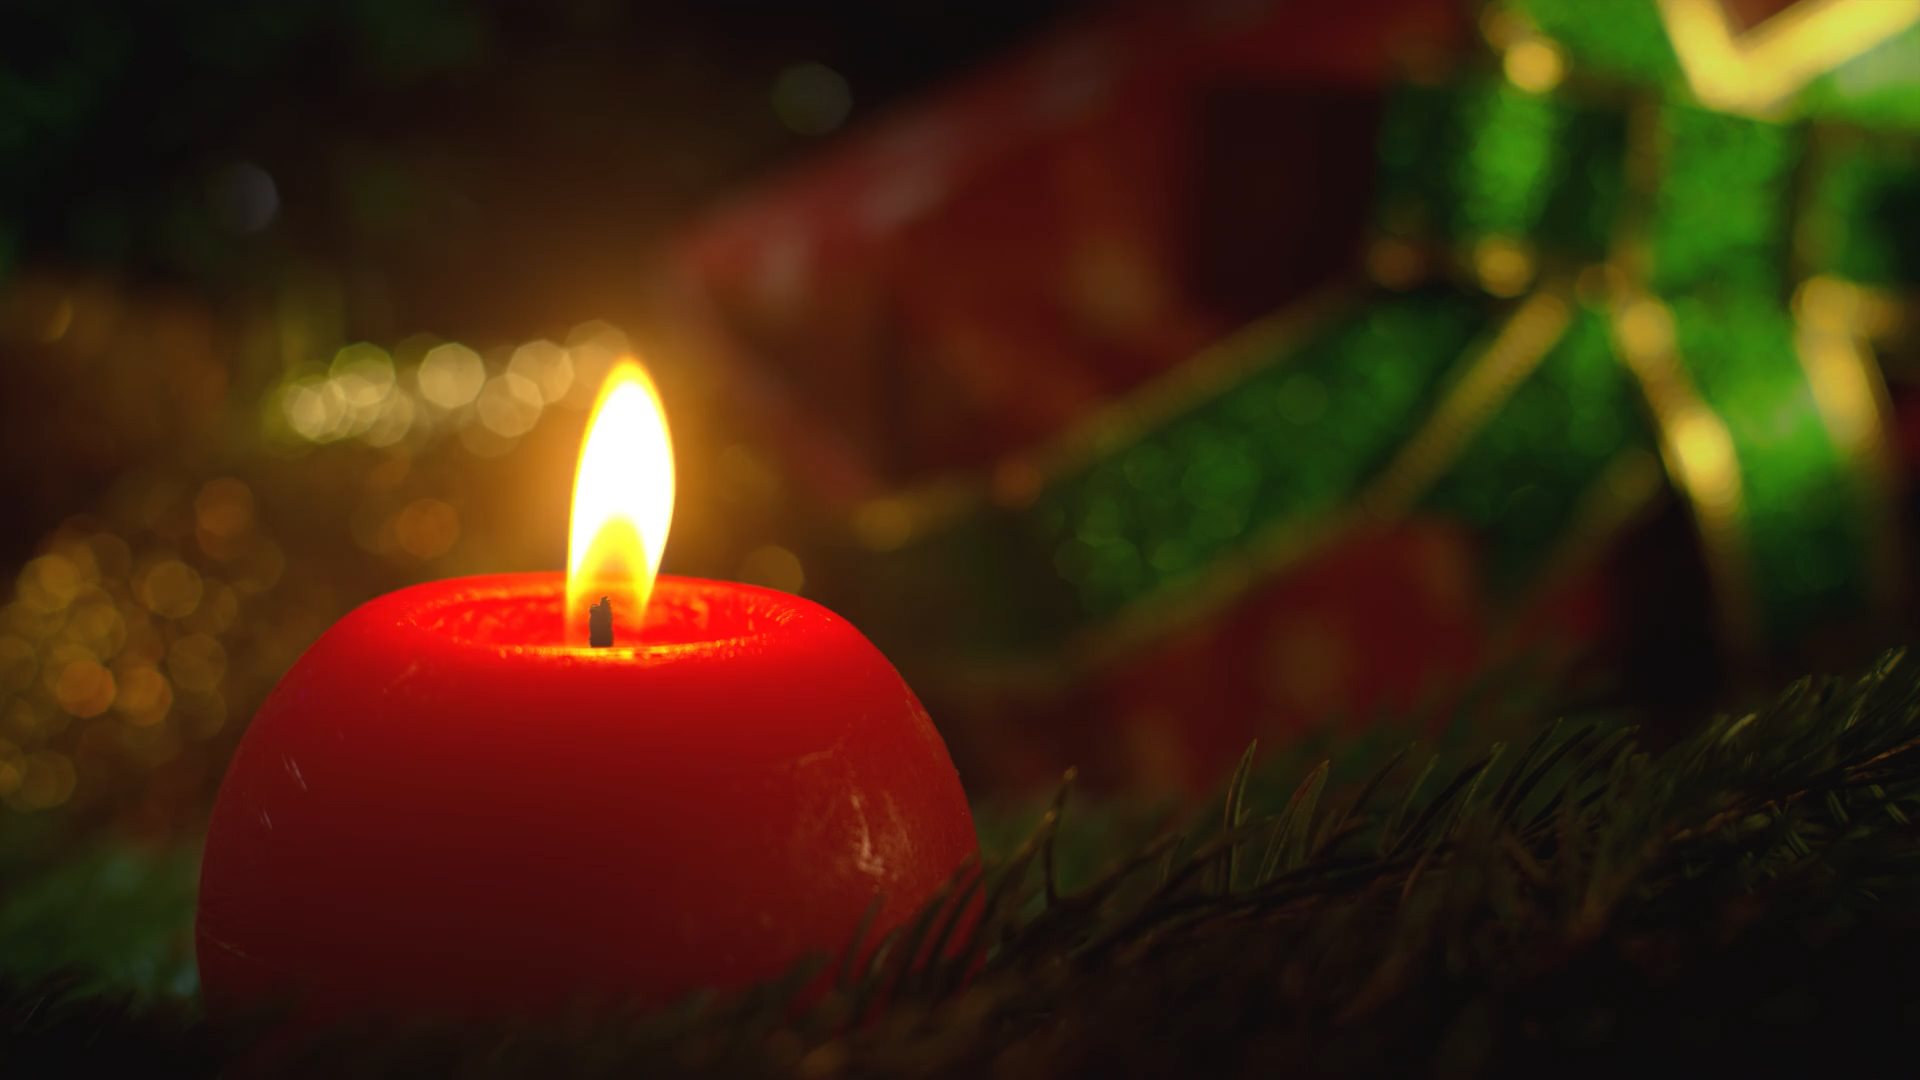 Video of burning red candle with Holiday present